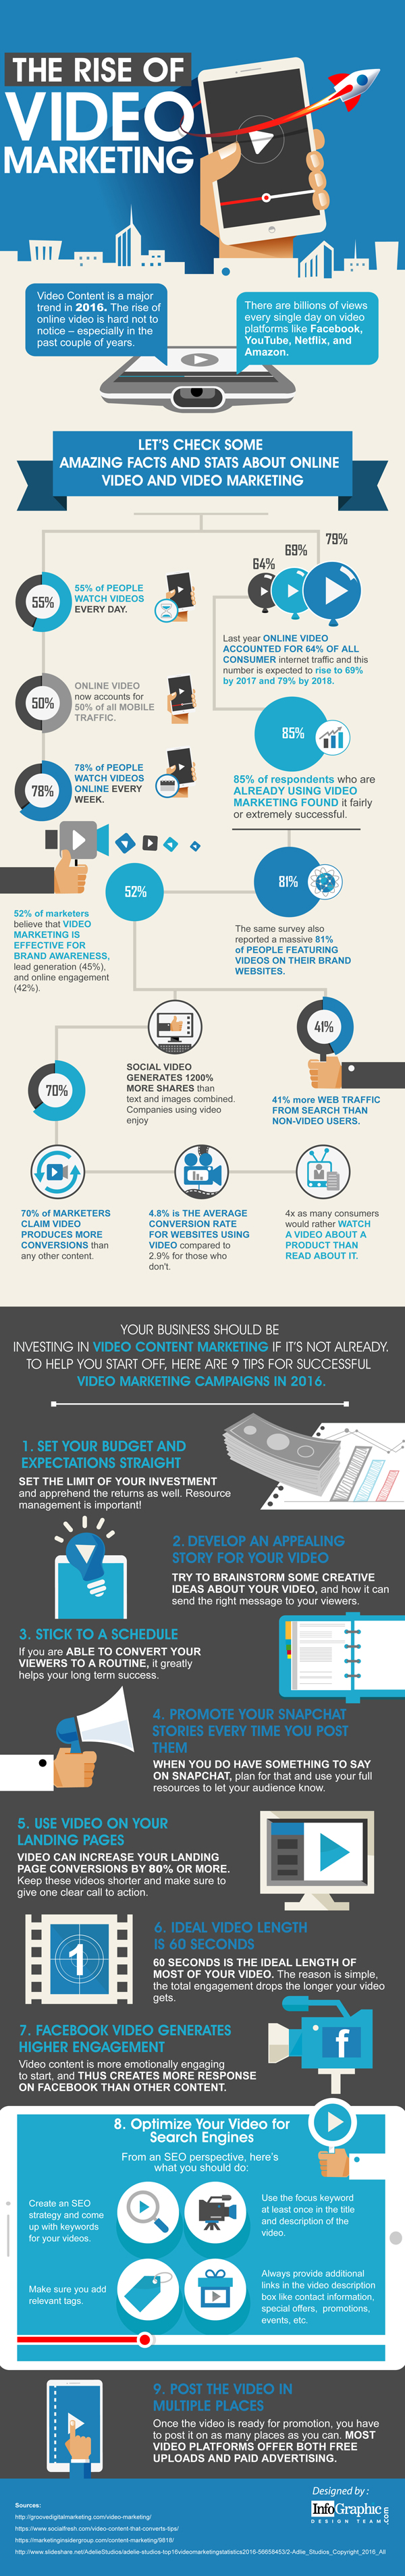 How Video Is Changing The Face Of Online Marketing [Infographic]